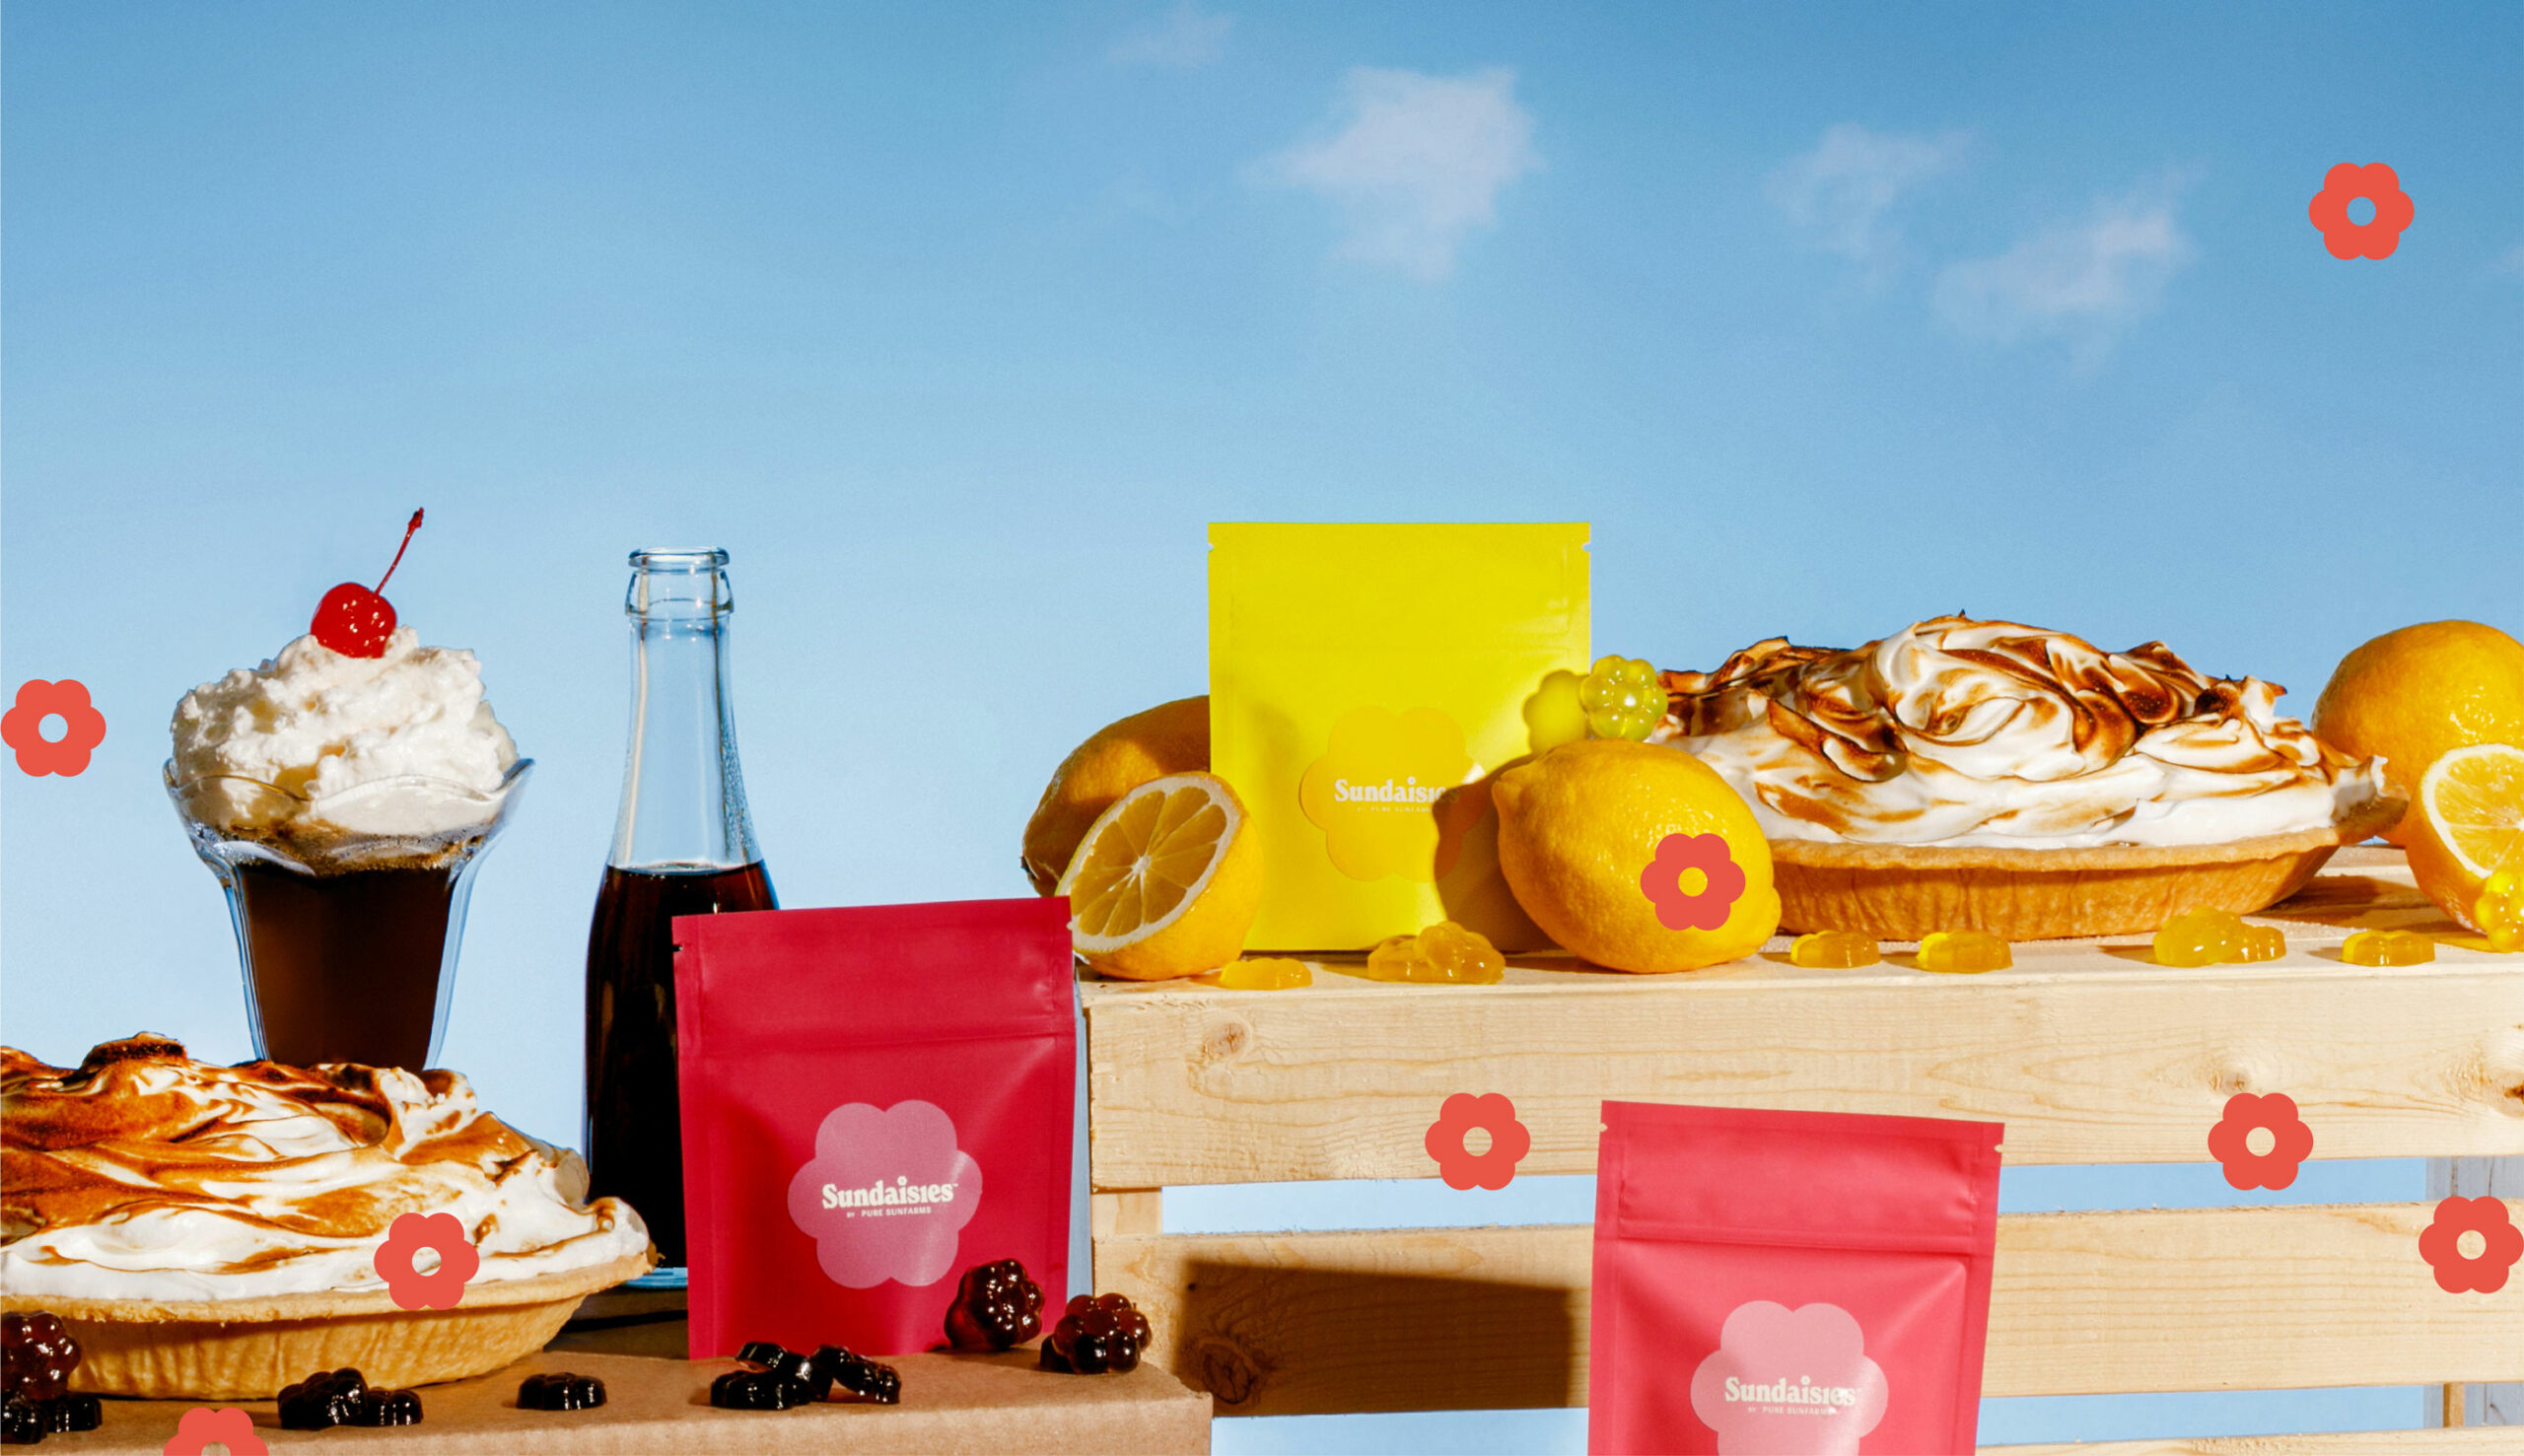 Picnic setting with fruits, pie, gummies and Sundaises packaging.